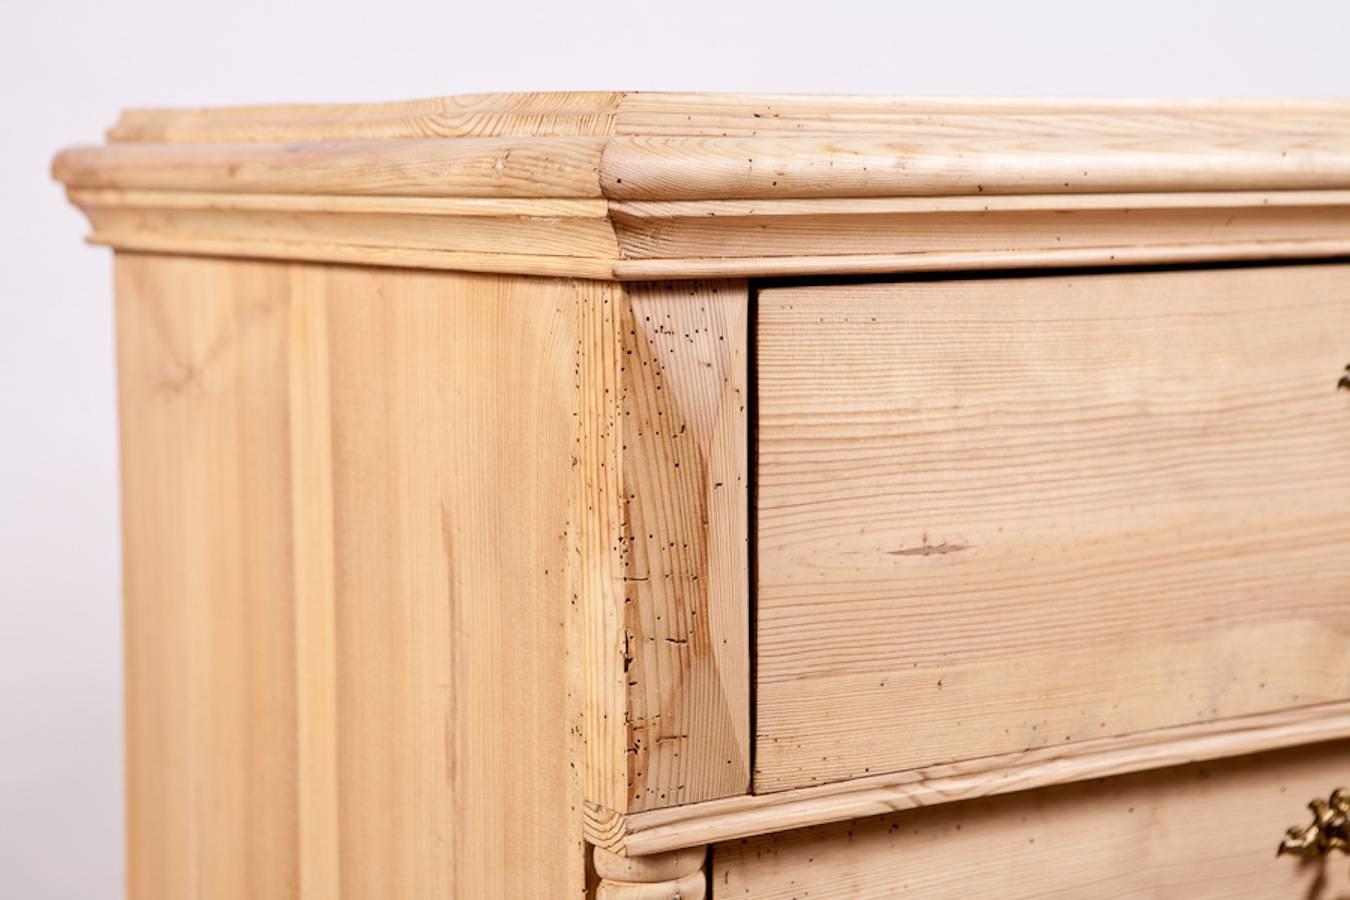 Scandinavian tall chest with five drawers in scrubbed pine, circa 1860.
This Classic Swedish tall chest provides ample storage, with drawers that function easily. Chest is completely original including turned feet and beautiful cherub hardware. All